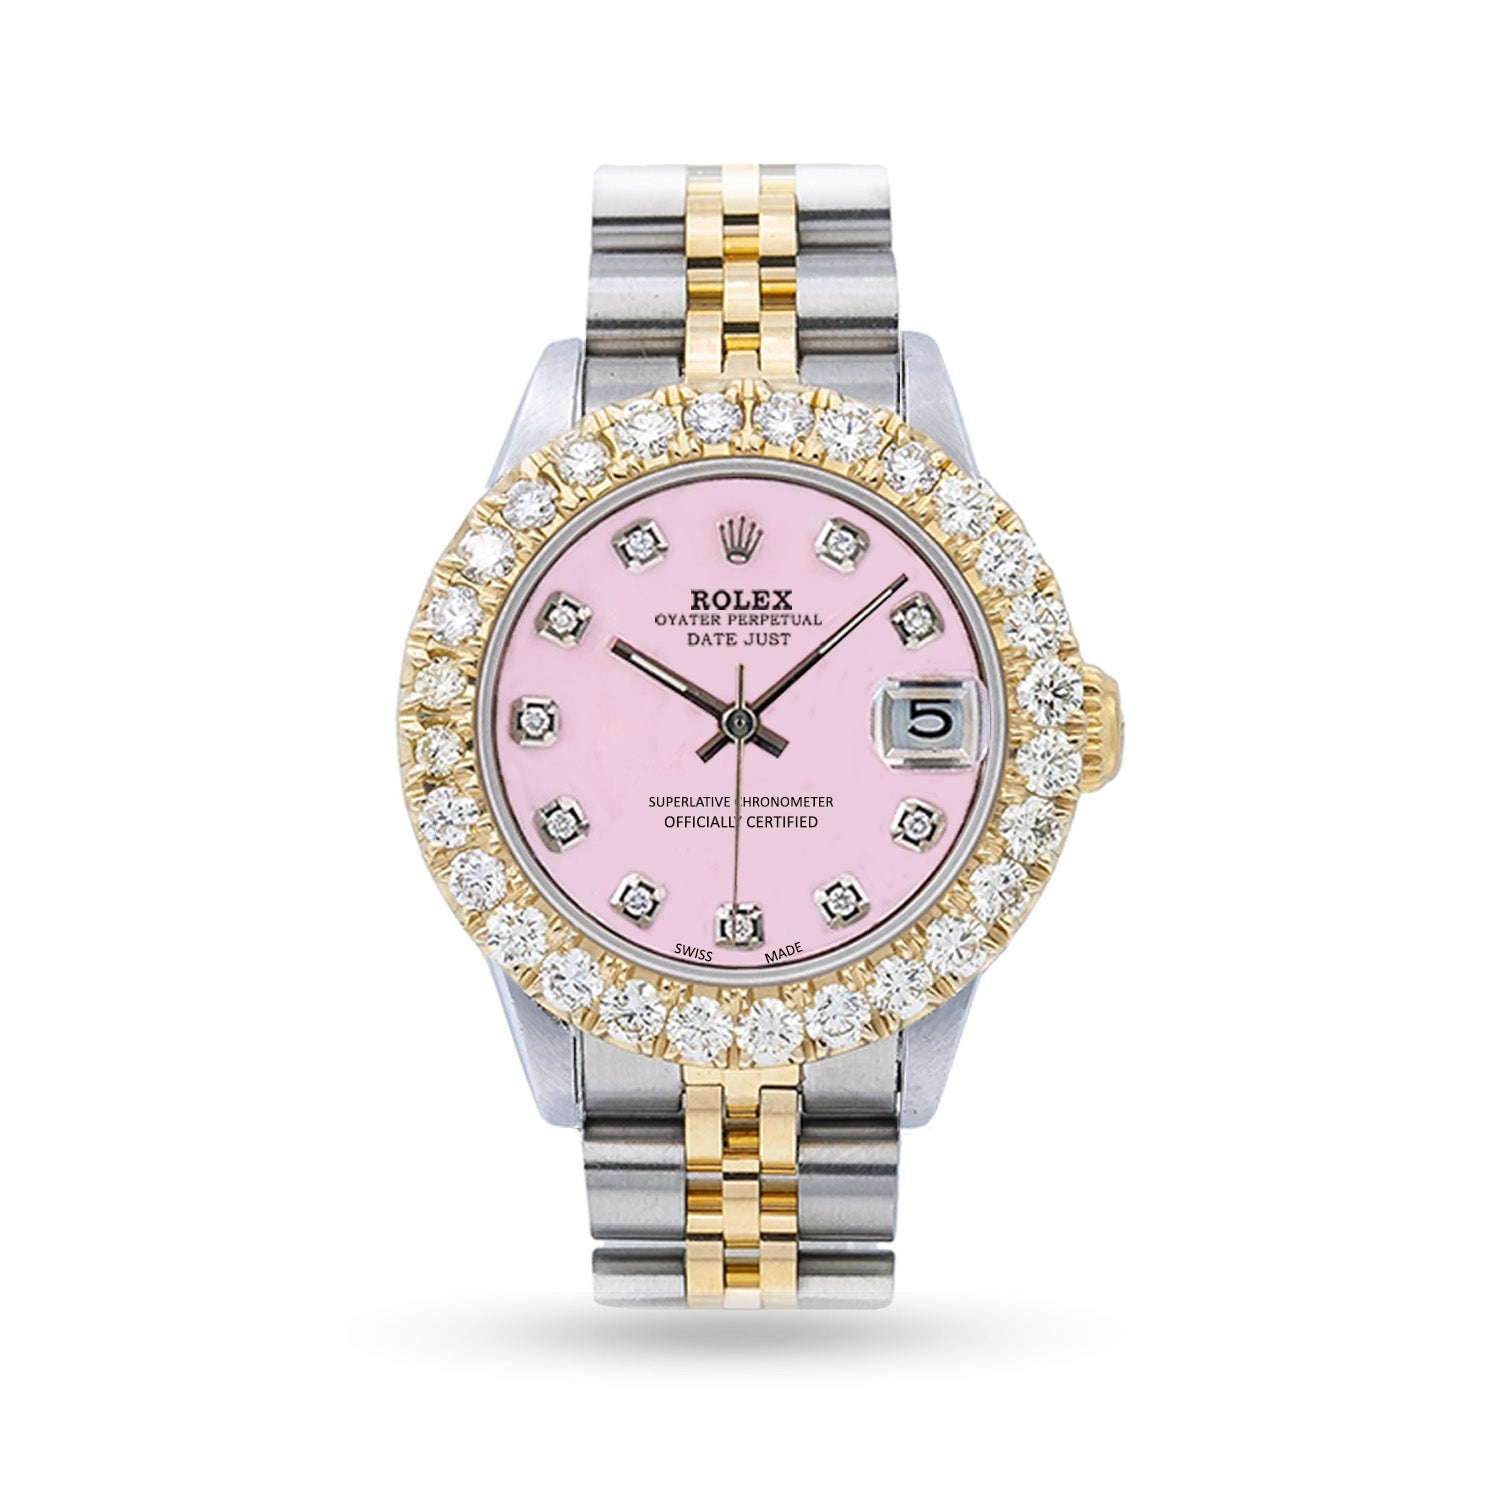 PRE OWNED ROLEX DATE JUST  JUBILEE BAND WITH CUSTOMIZED 2.00 CT DIAMOND BAZEL